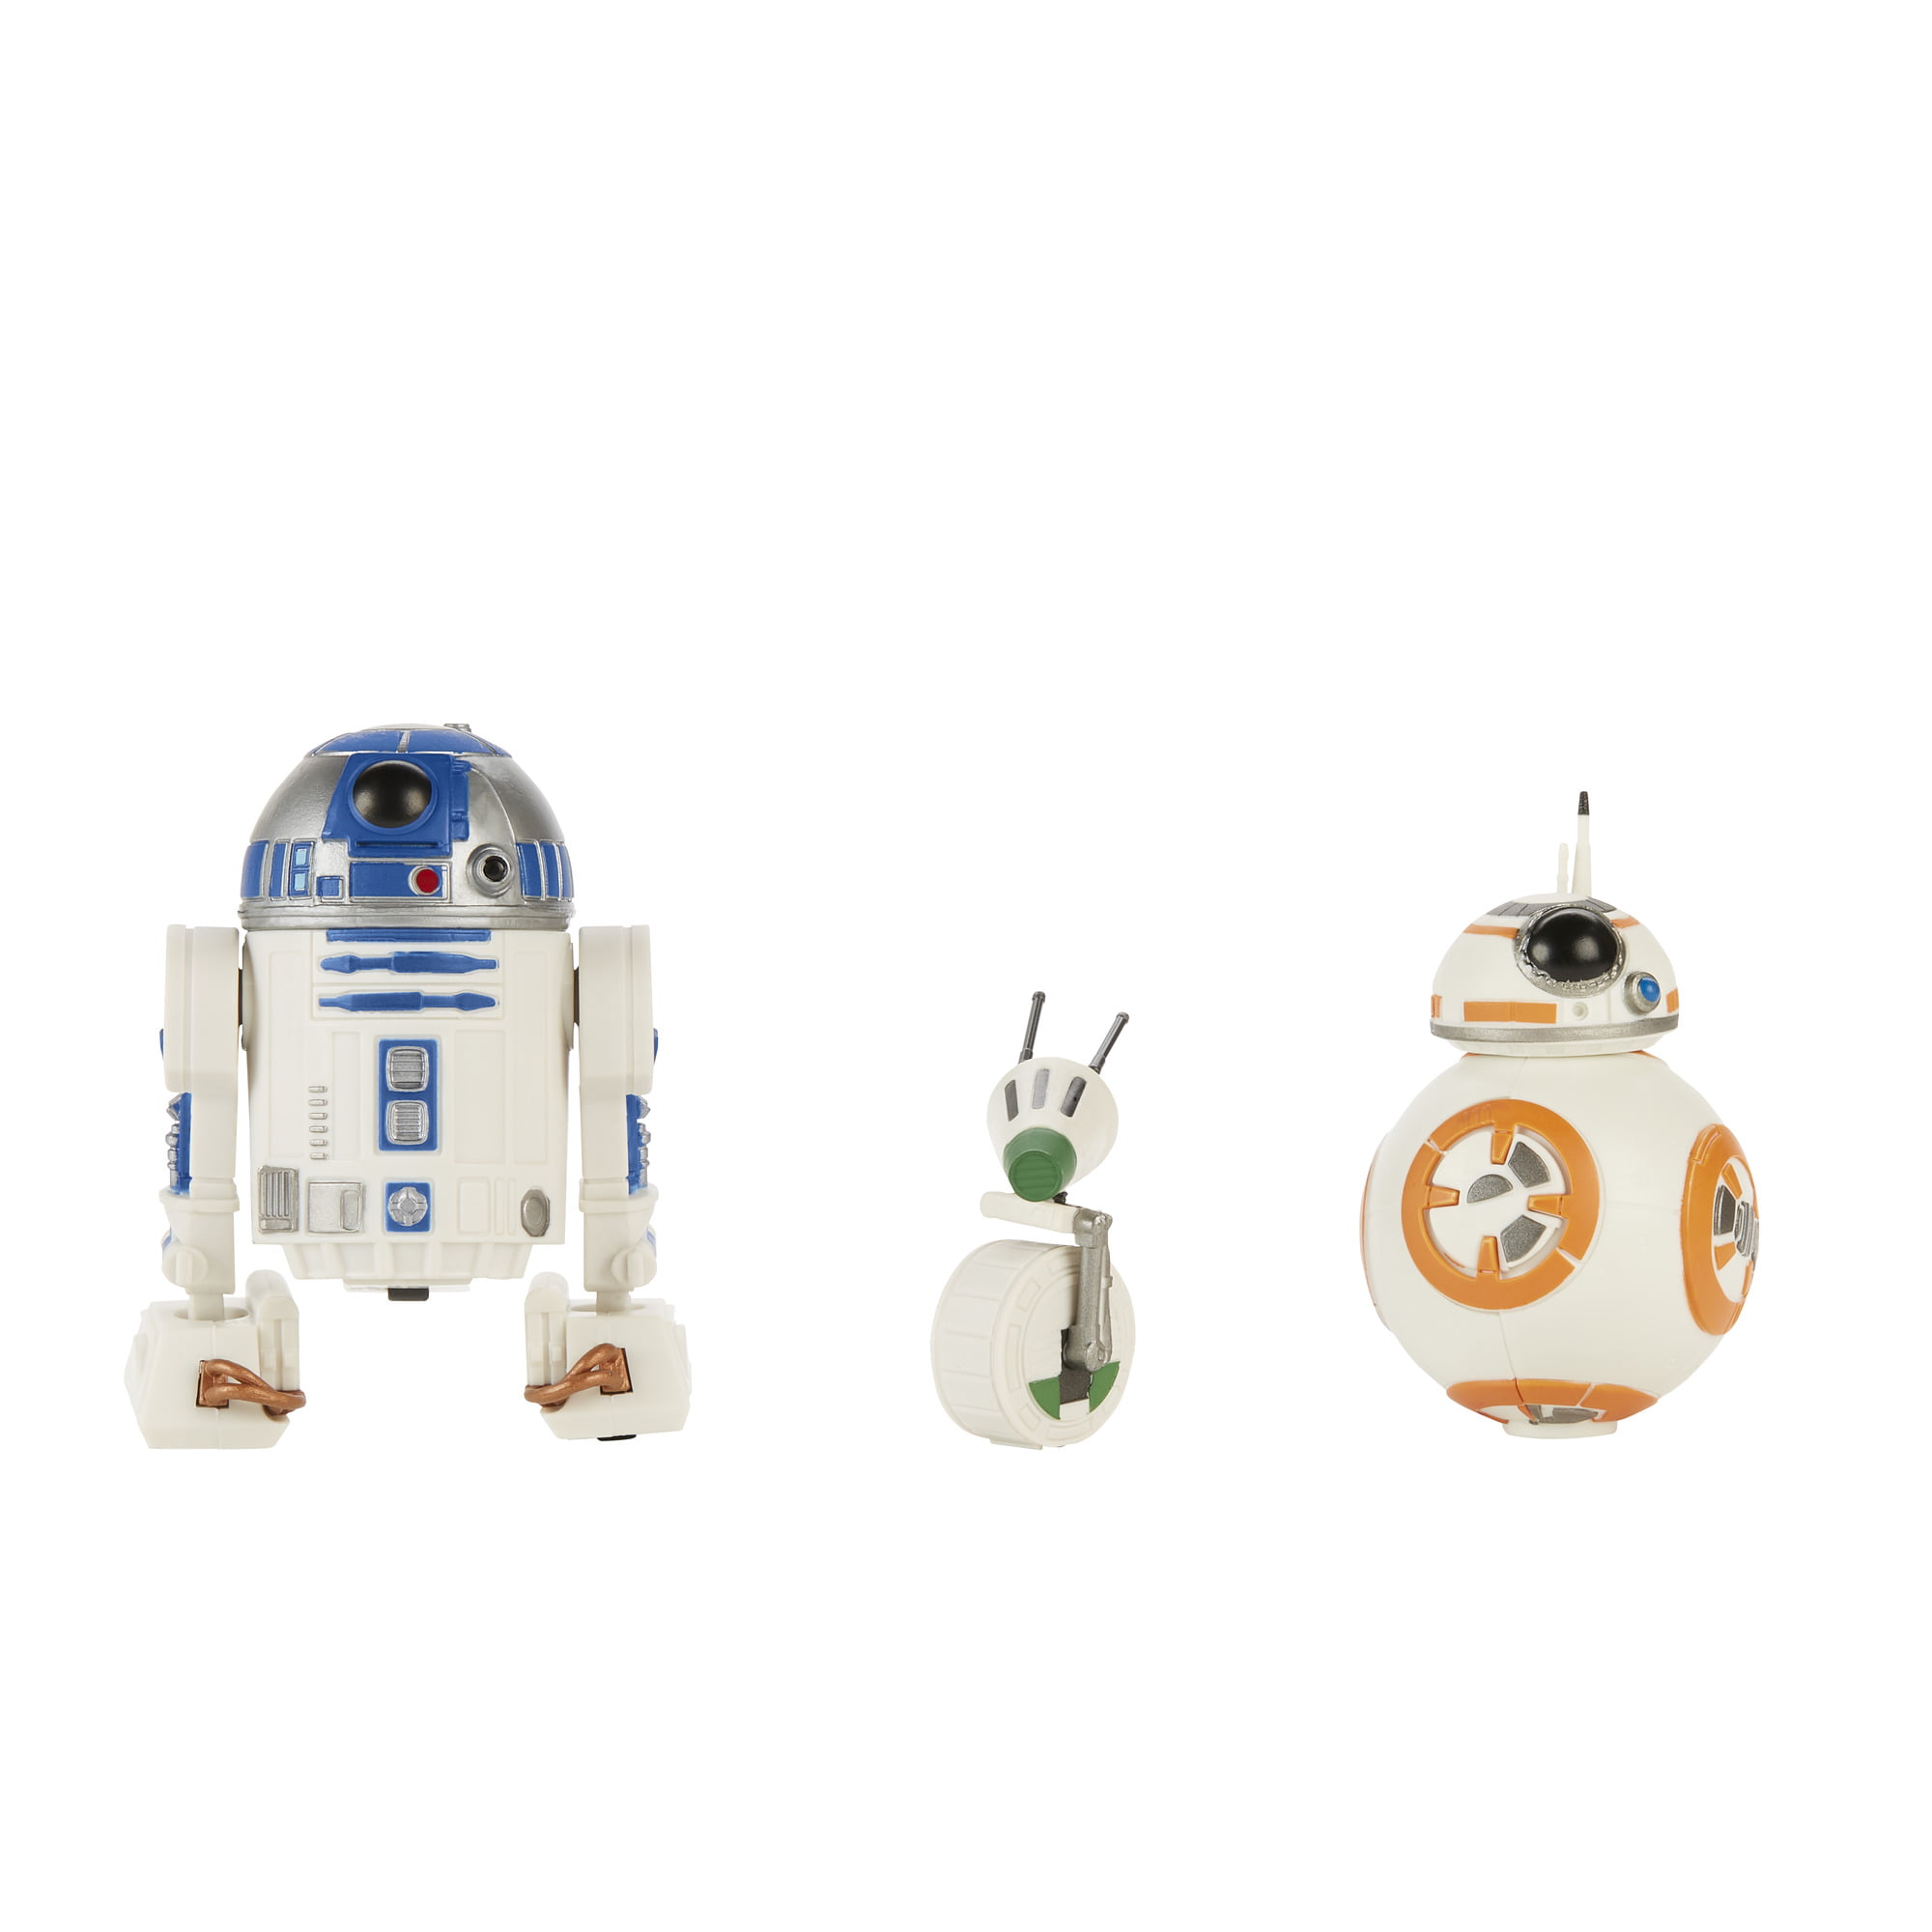 Lot Star Wars R2-D2 & BB-8 Droid Action Figure Force Awakens Boy Kids Toy Gift 